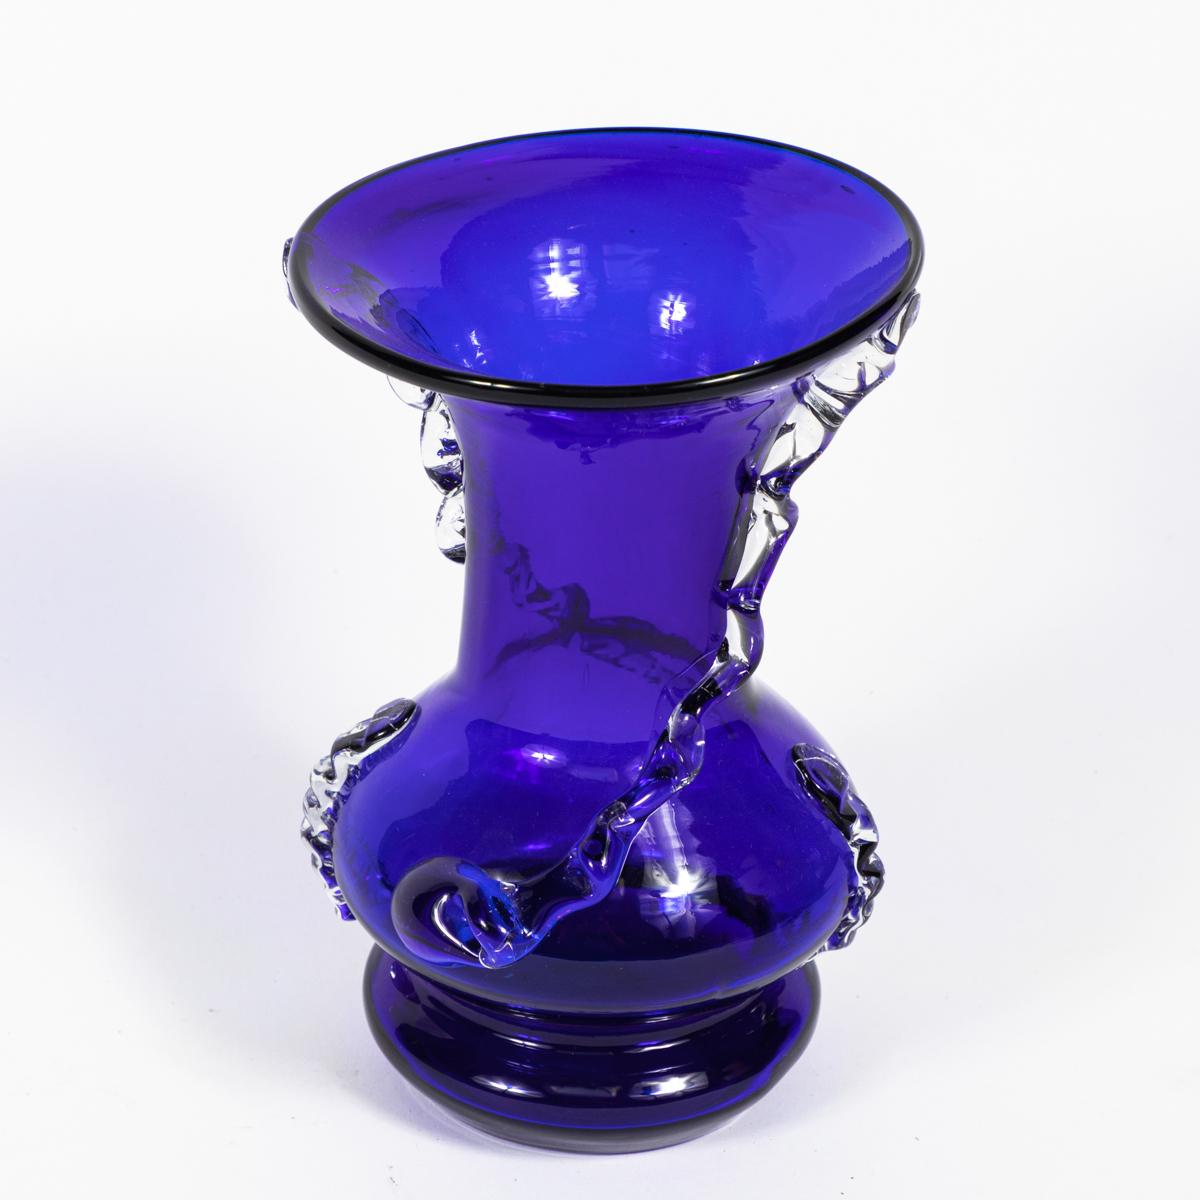 Mid-century cobalt blown glass vase with clear glass decoration. Glossy, tactile, and richly hued, the vase has gem-like appeal. Its gently fluted lip is in perfect proportional harmony with the rounded base. Delicate streams of clear glass buttress